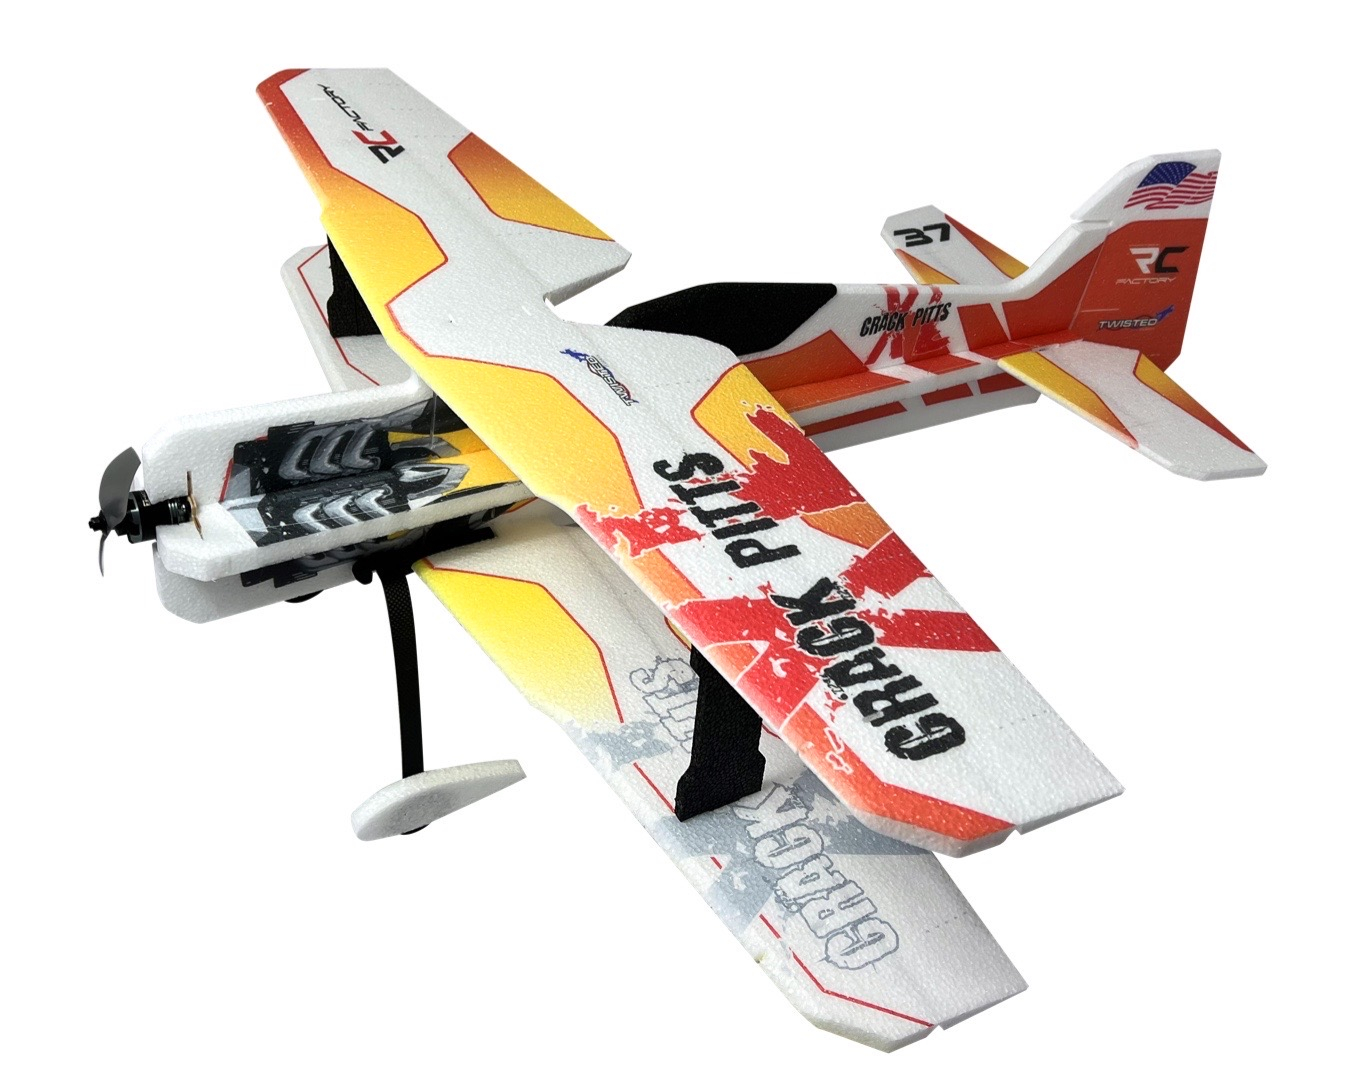 Crack Pitts XL RC Factory